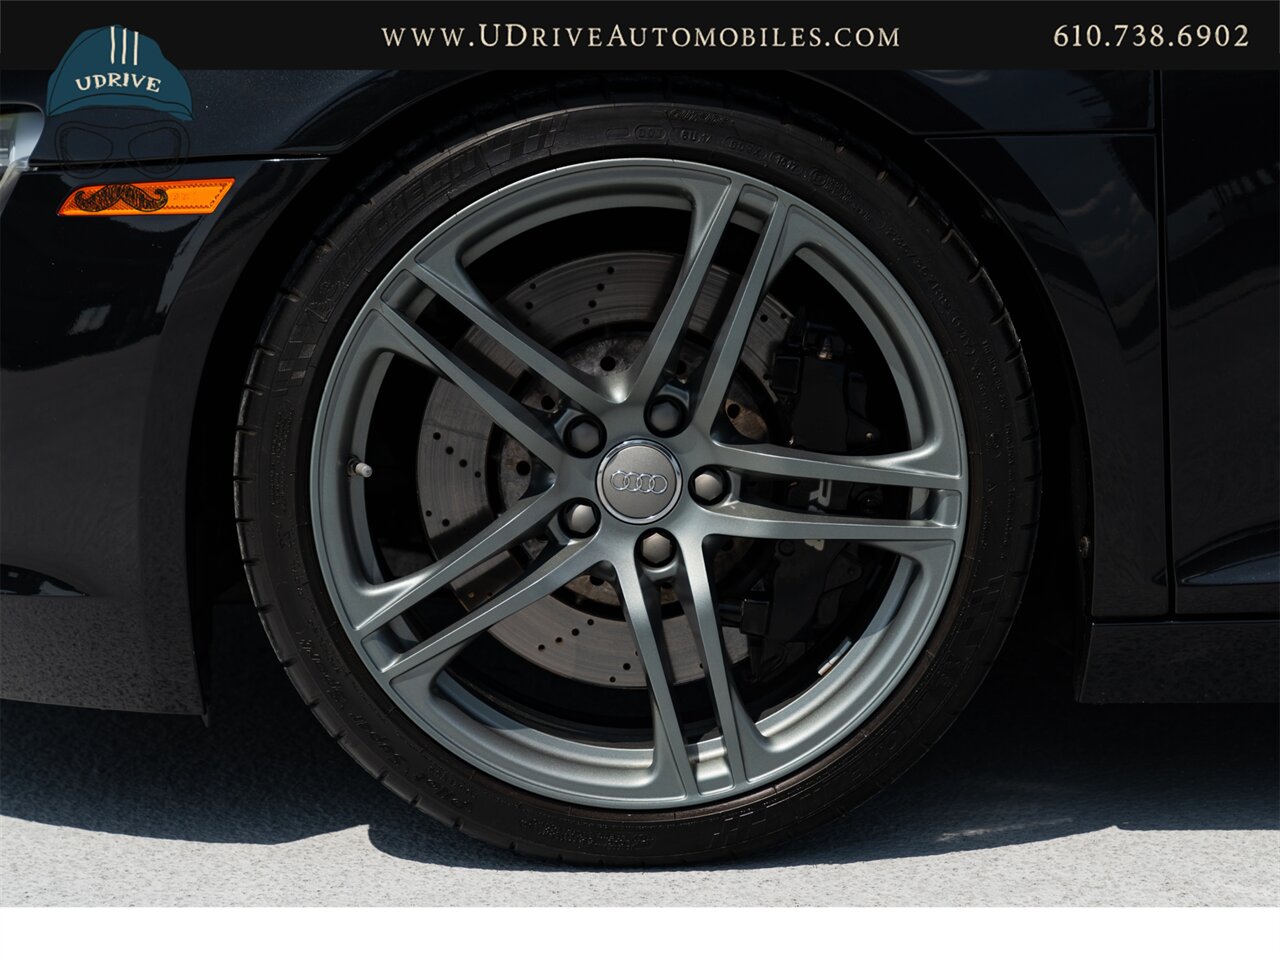 2012 Audi R8 4.2 Quattro  6 Speed Manual 1 Owner Service History - Photo 52 - West Chester, PA 19382